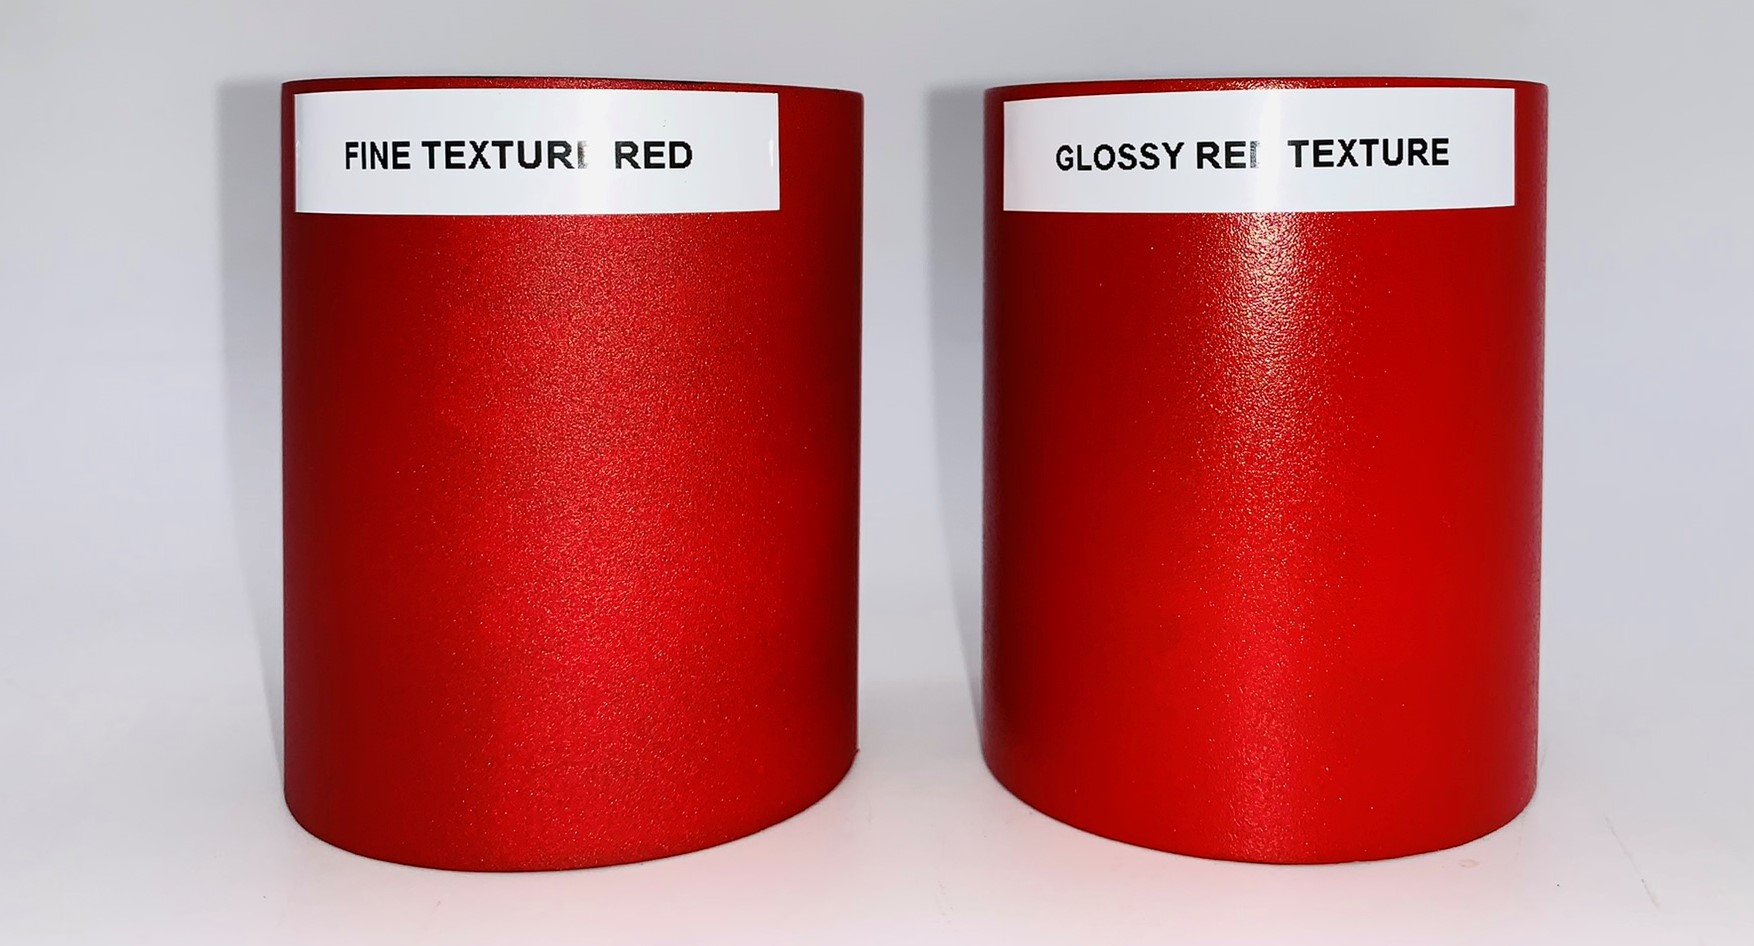 Two fine and glossy texture red colors